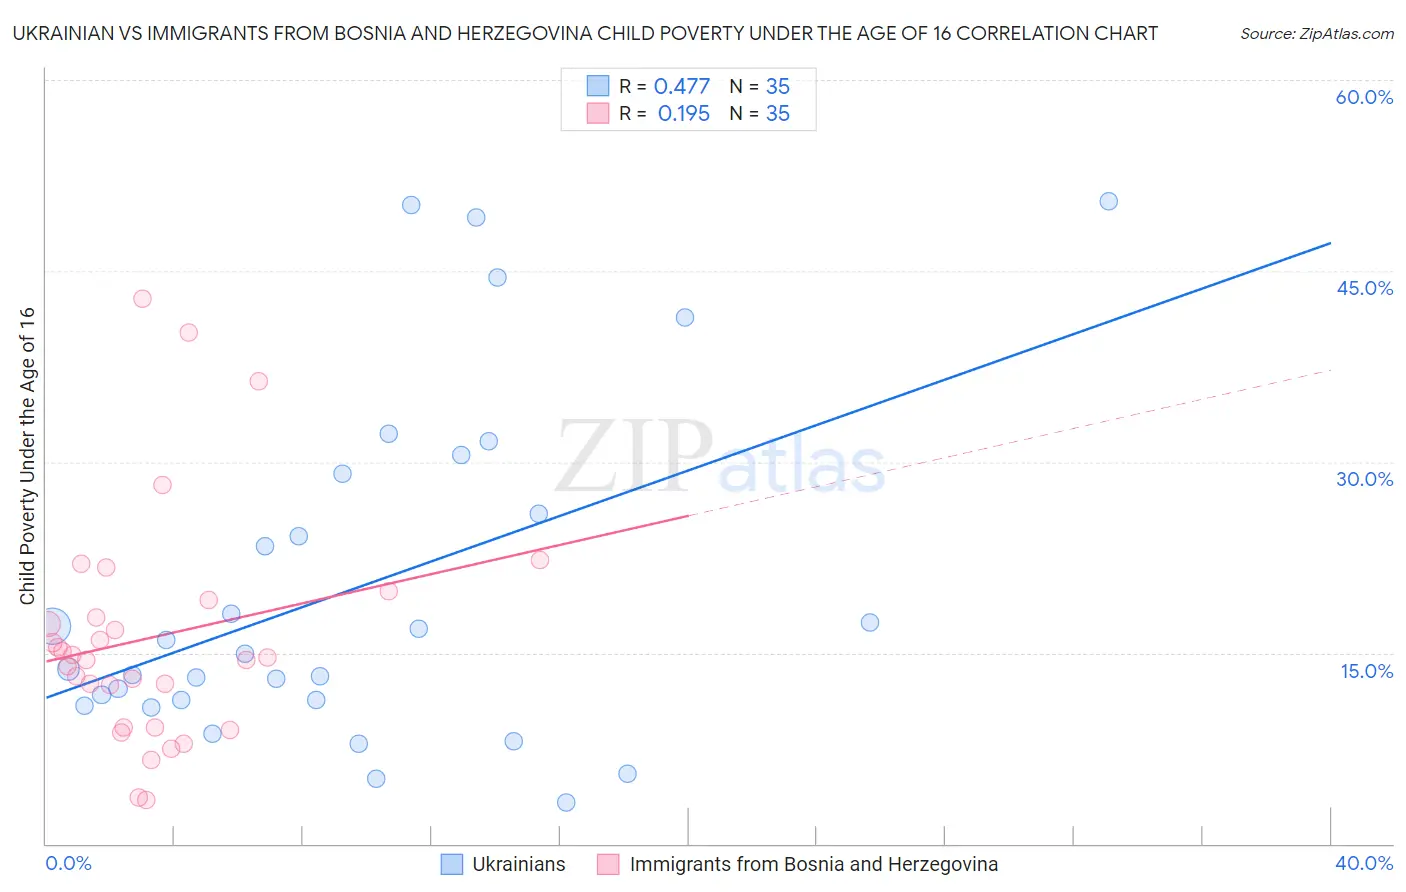 Ukrainian vs Immigrants from Bosnia and Herzegovina Child Poverty Under the Age of 16